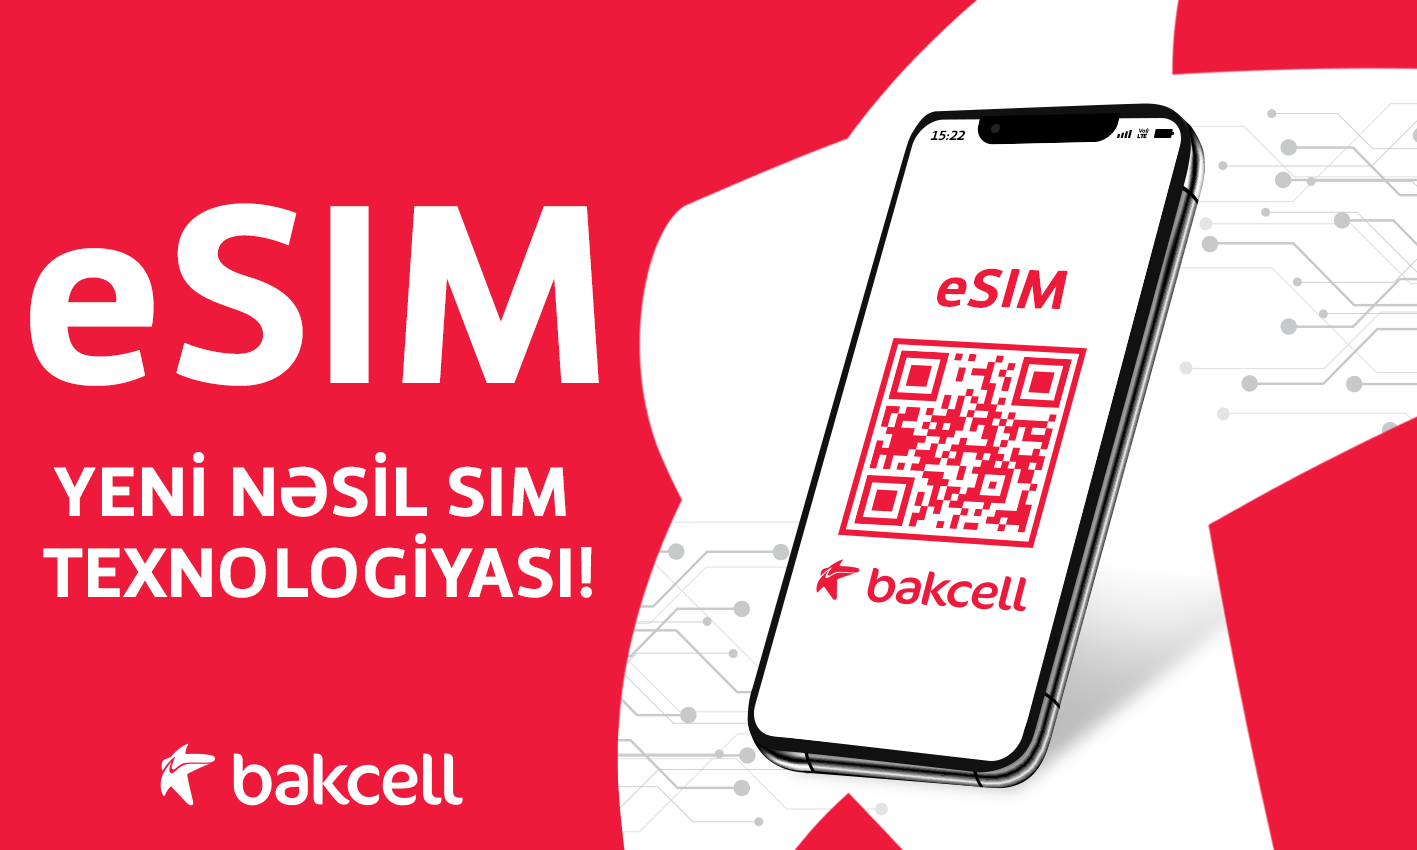 Bakcell launches eSIM – for the first time in Azerbaijan (VIDEO)